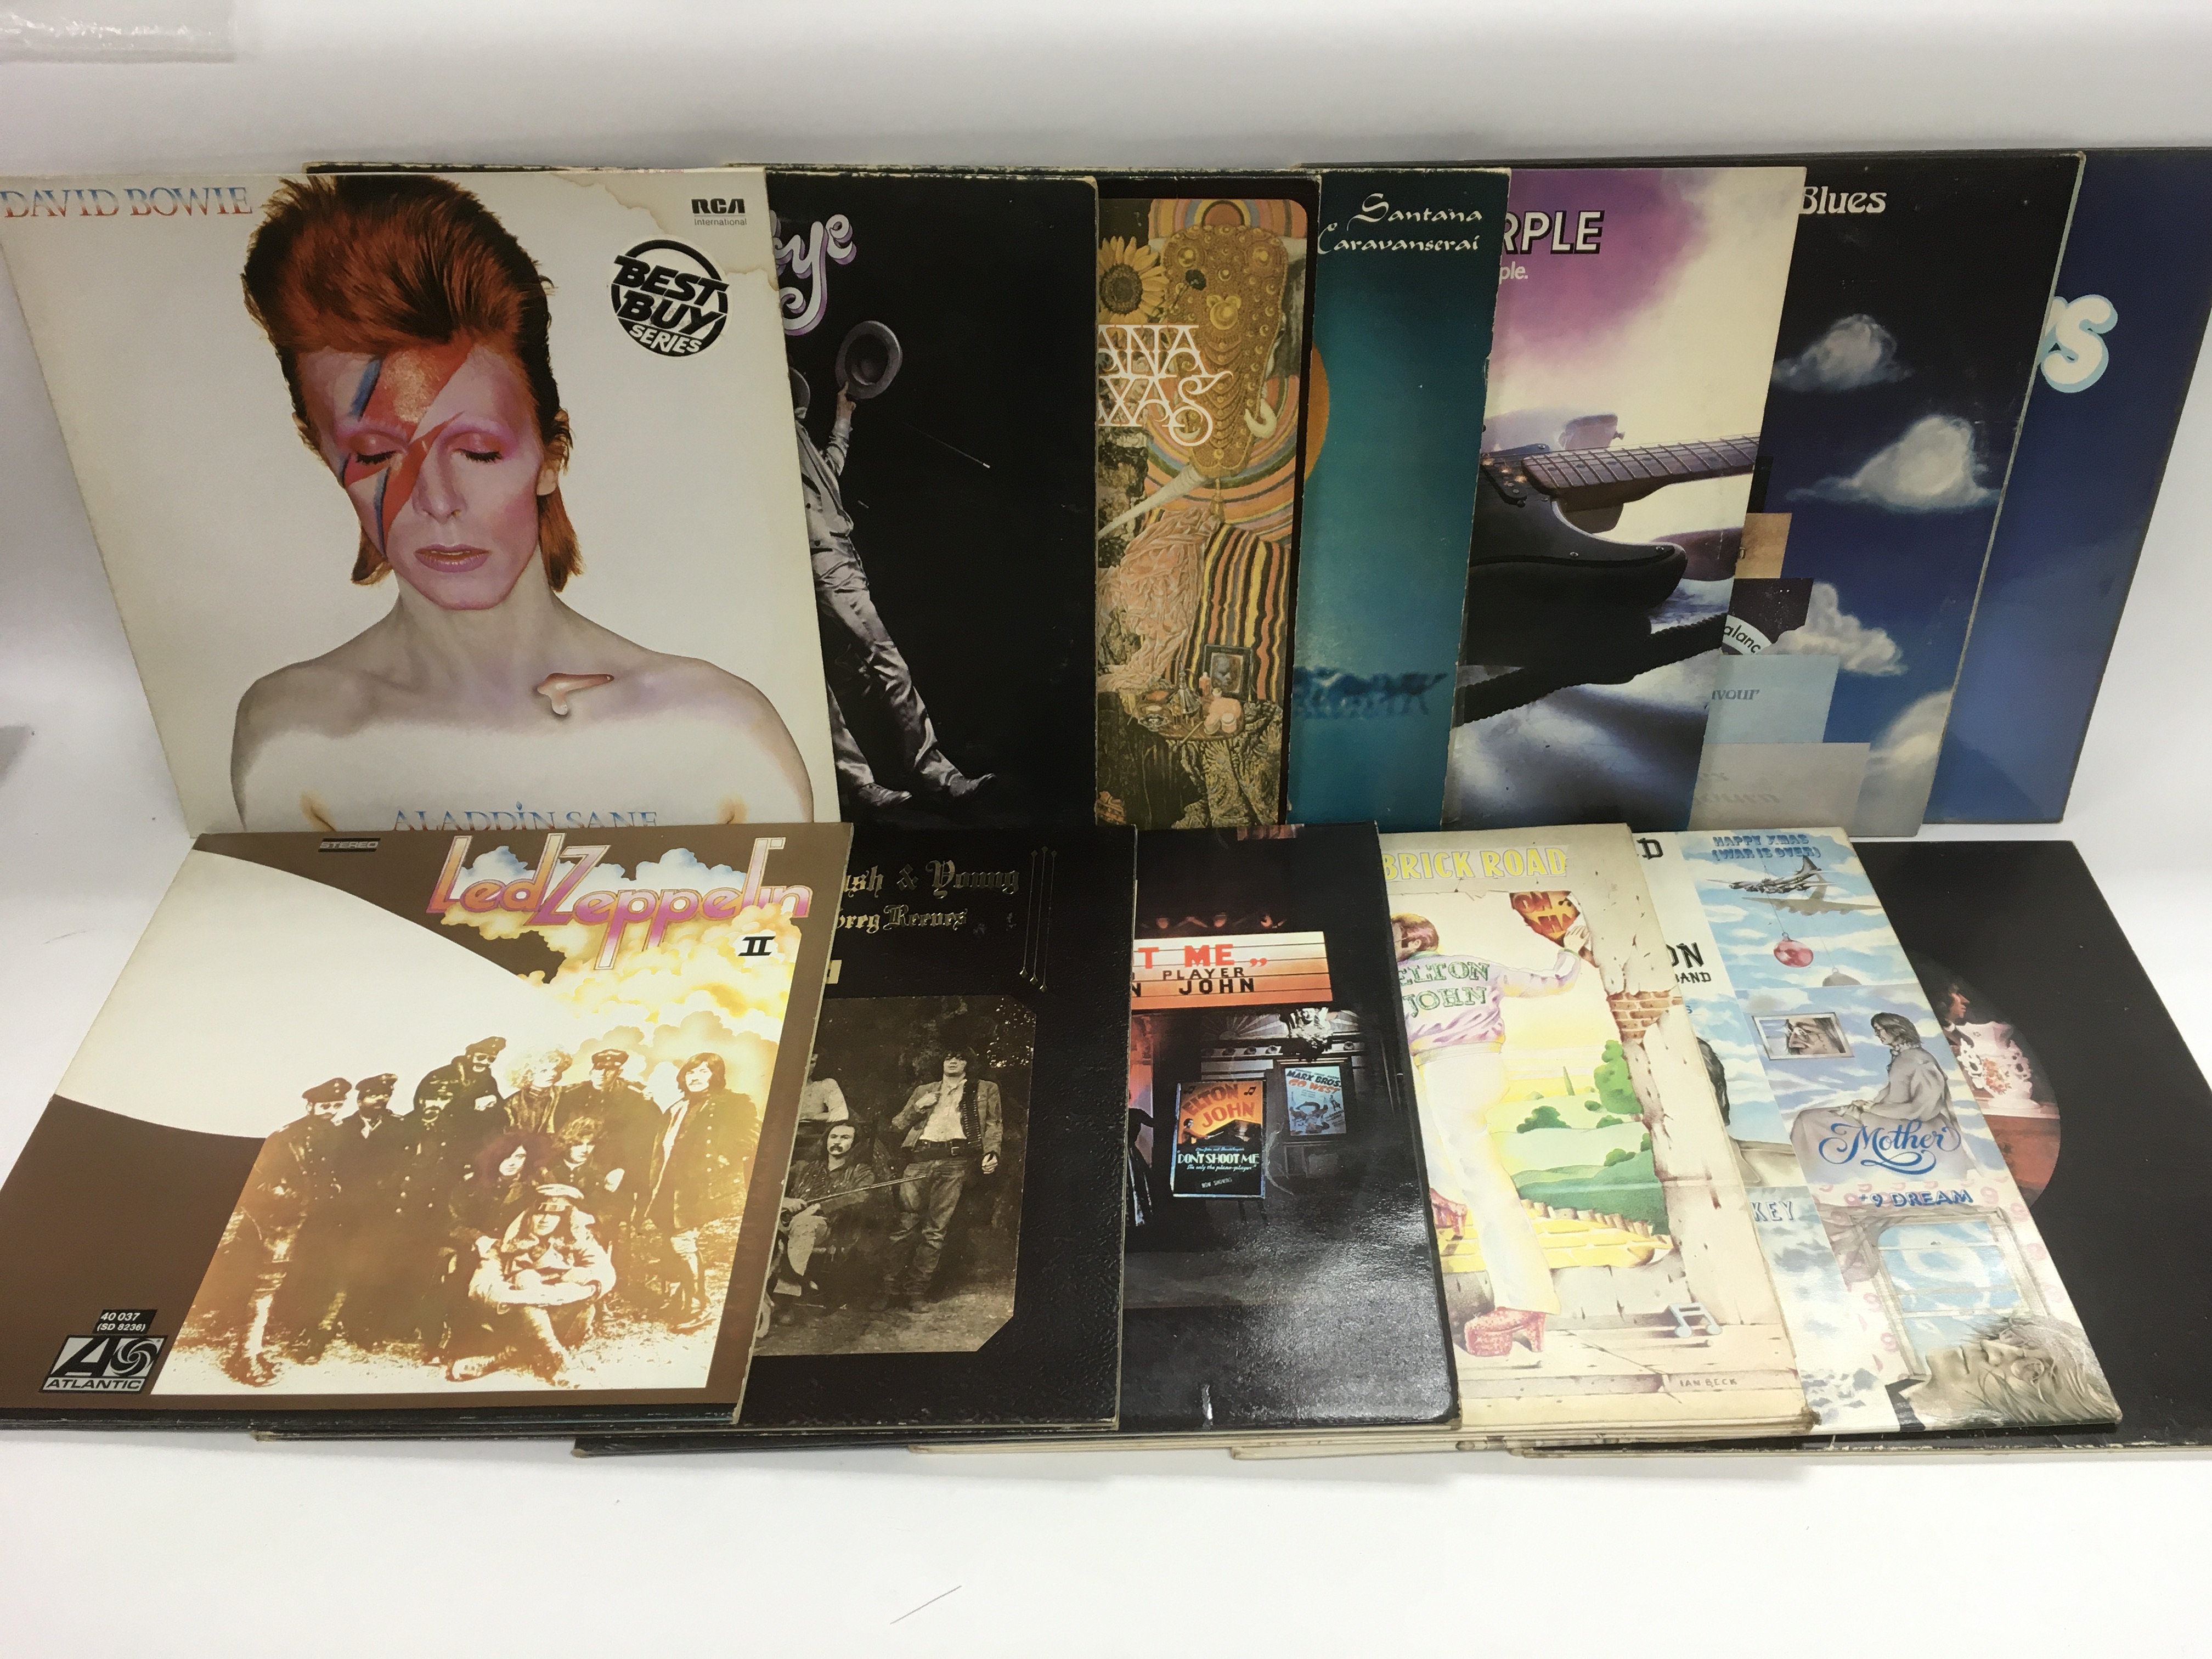 A collection of various rock LPs by various artist